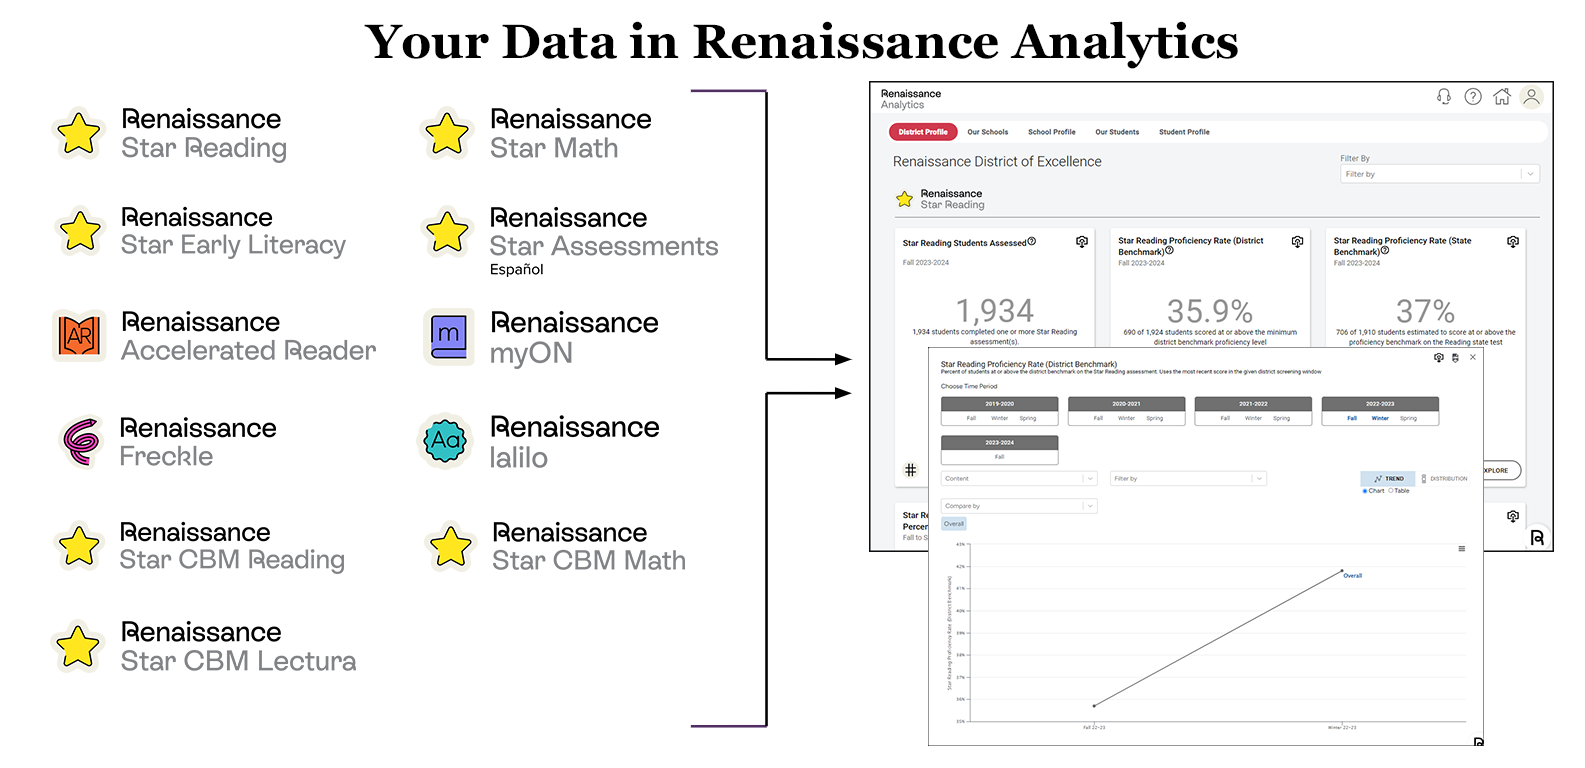 Renaissance Analytics includes data from Star and Star CBM assessments, Accelerated Reader, myON, Freckle, and Lalilo